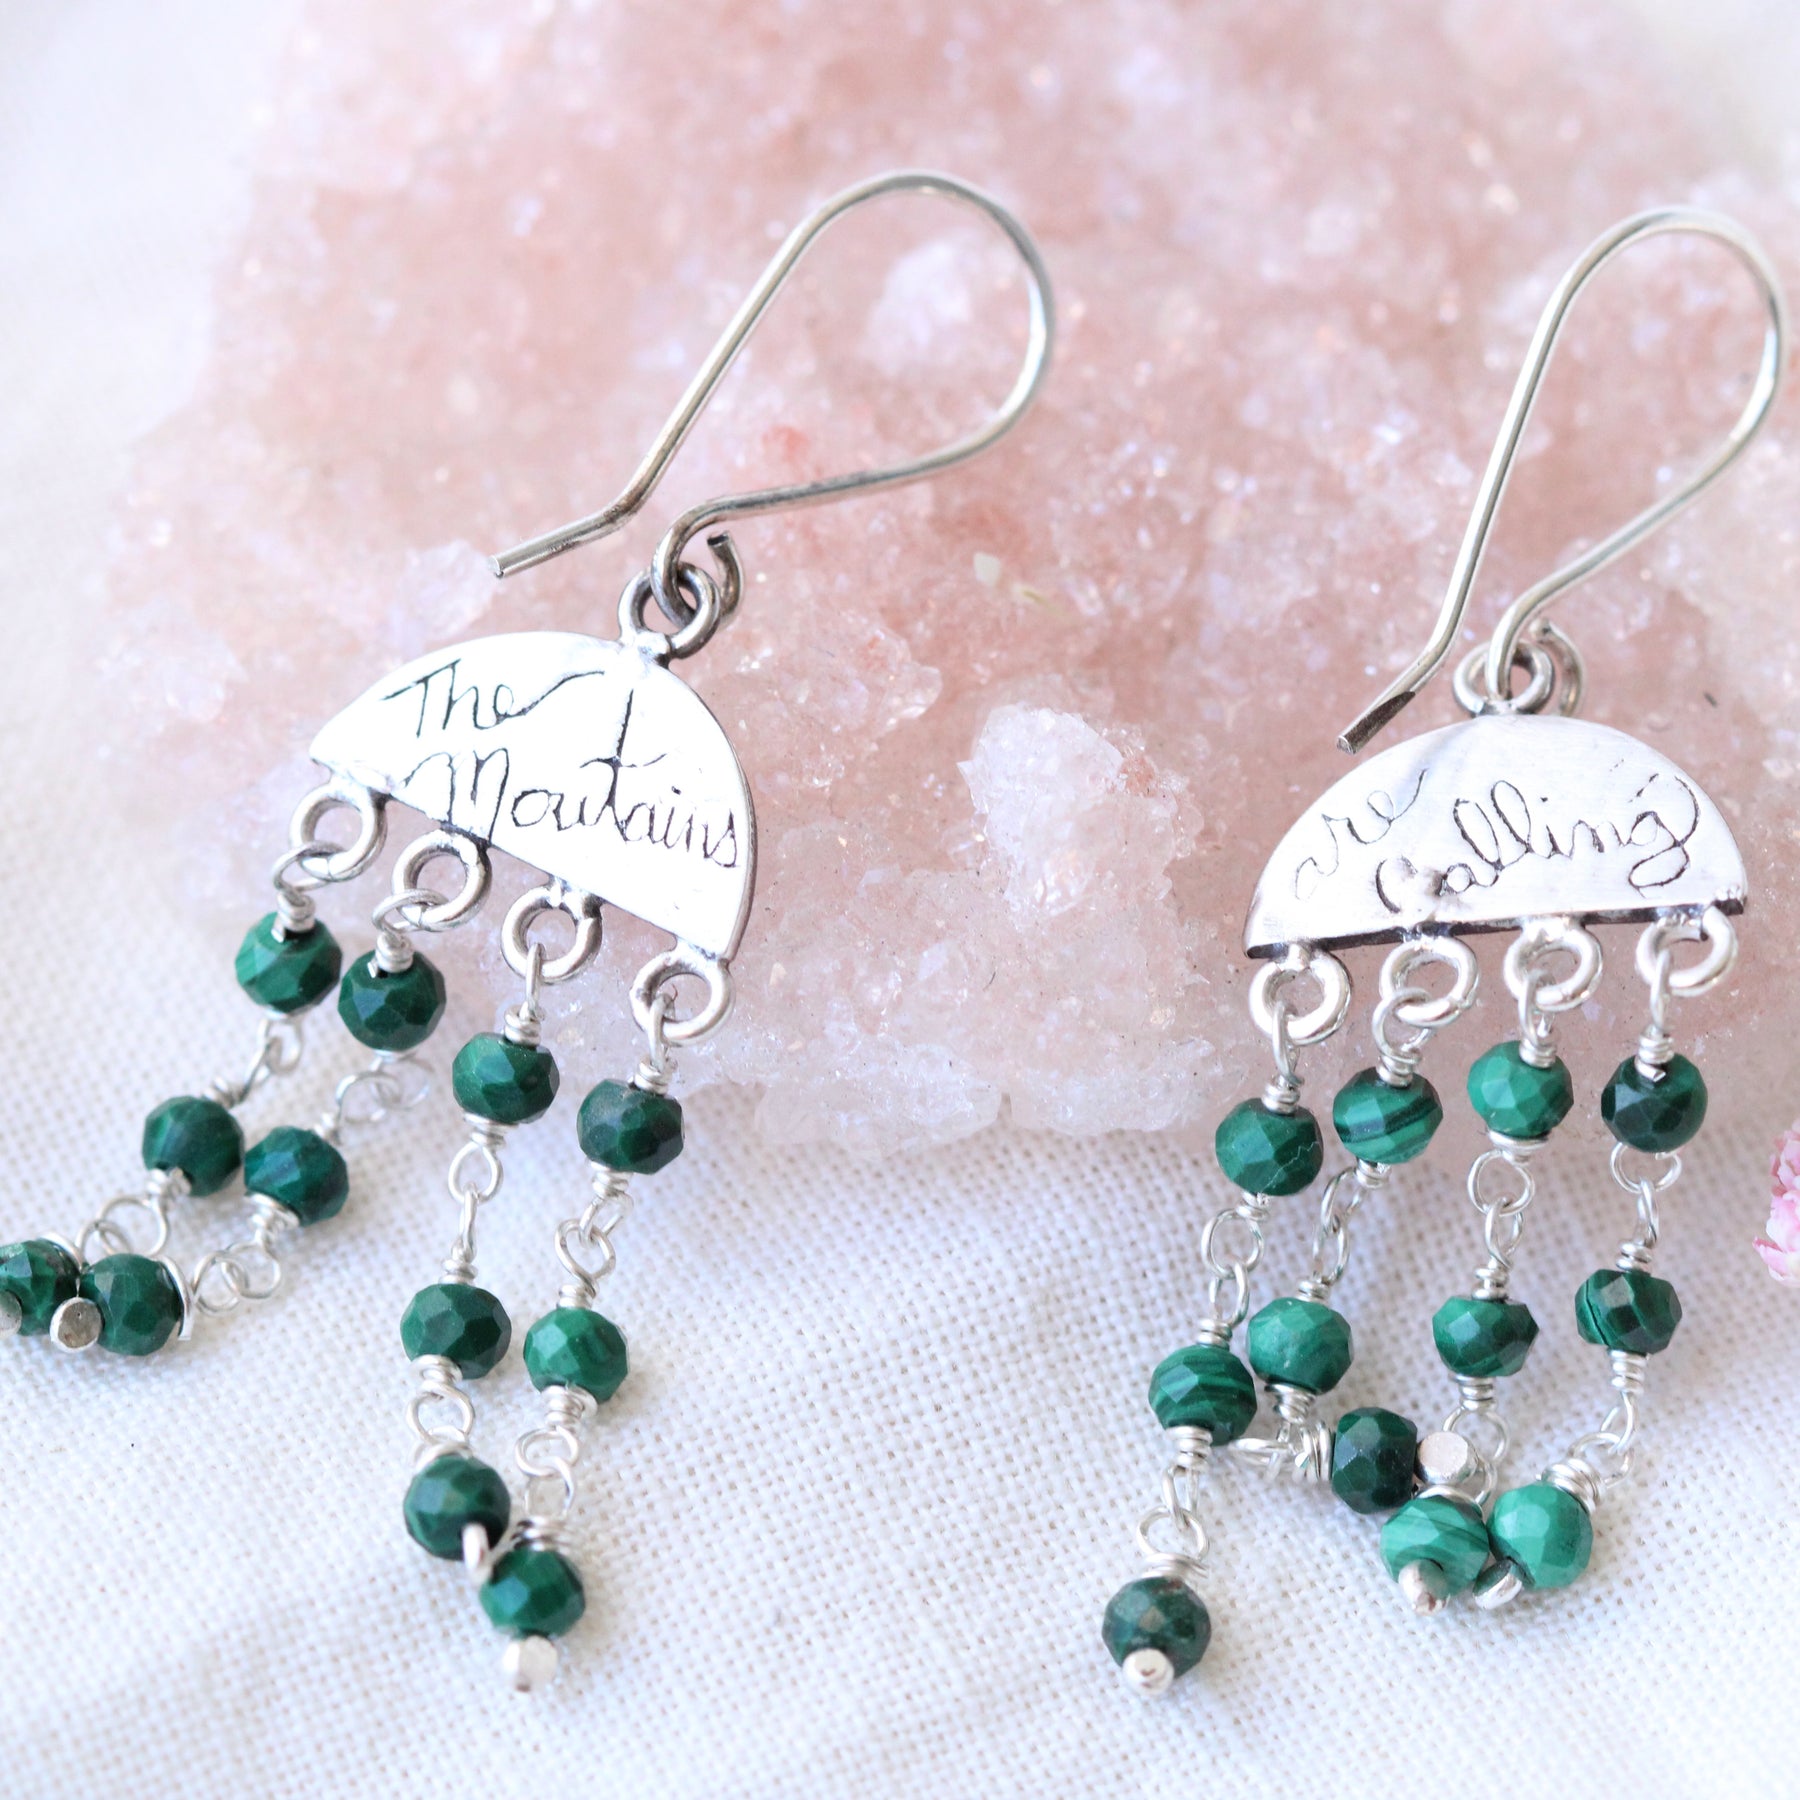 The Mountains are Calling sterling silver and Malachite earrings